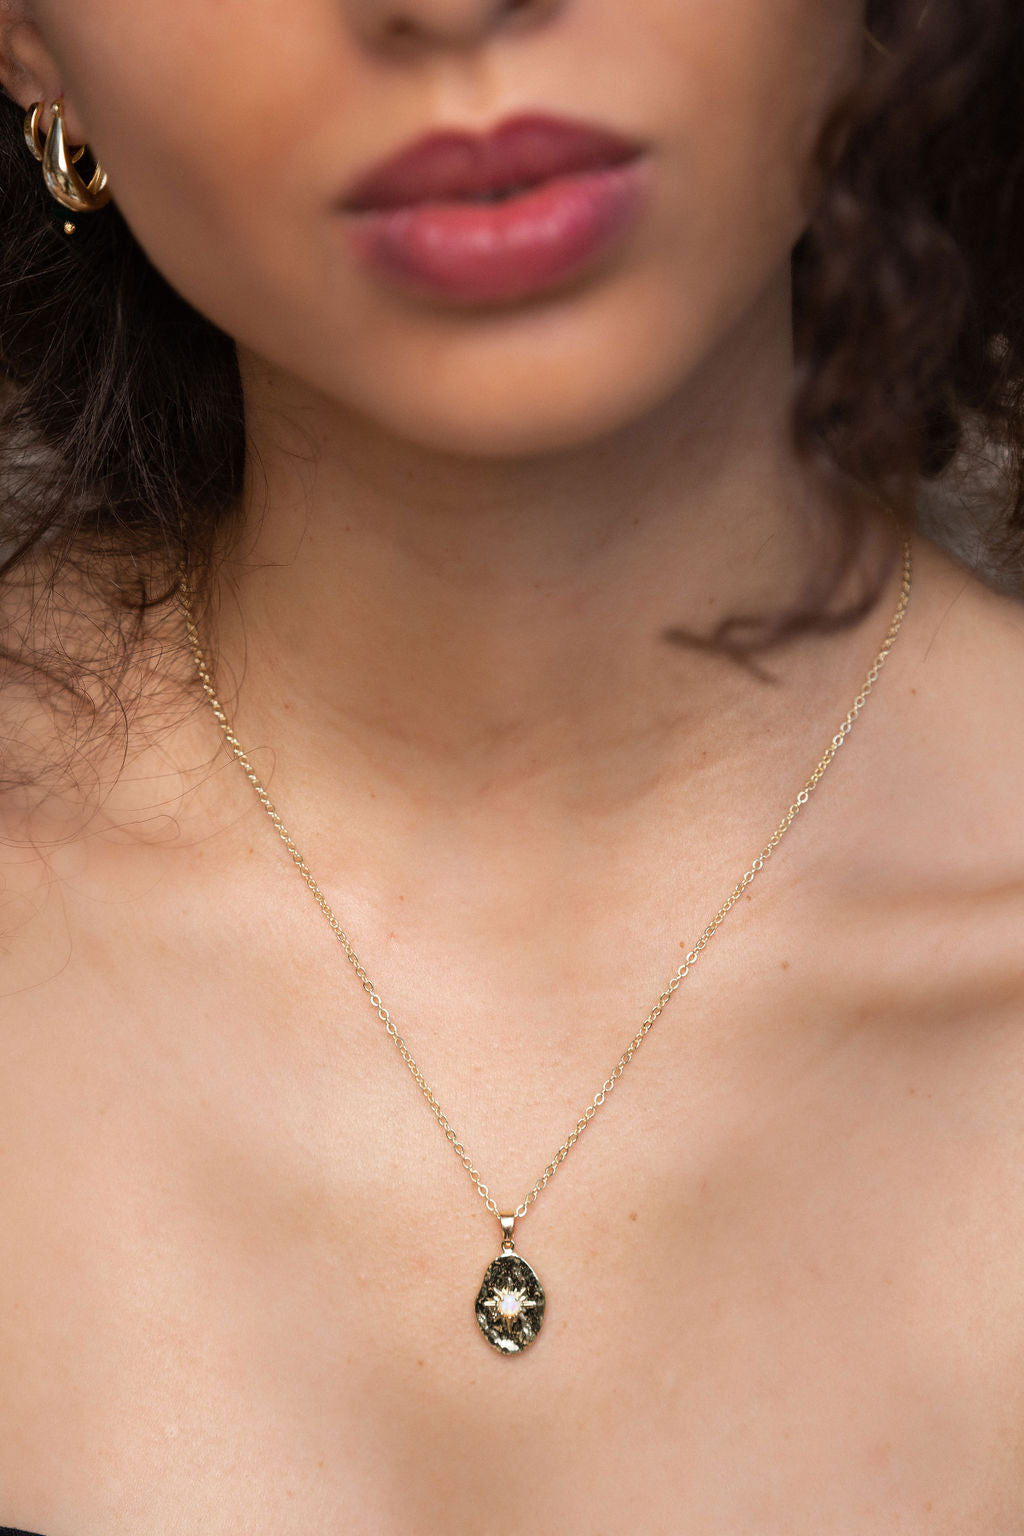 DELICATE-OPAL-GOLD-NECKLACE-on body